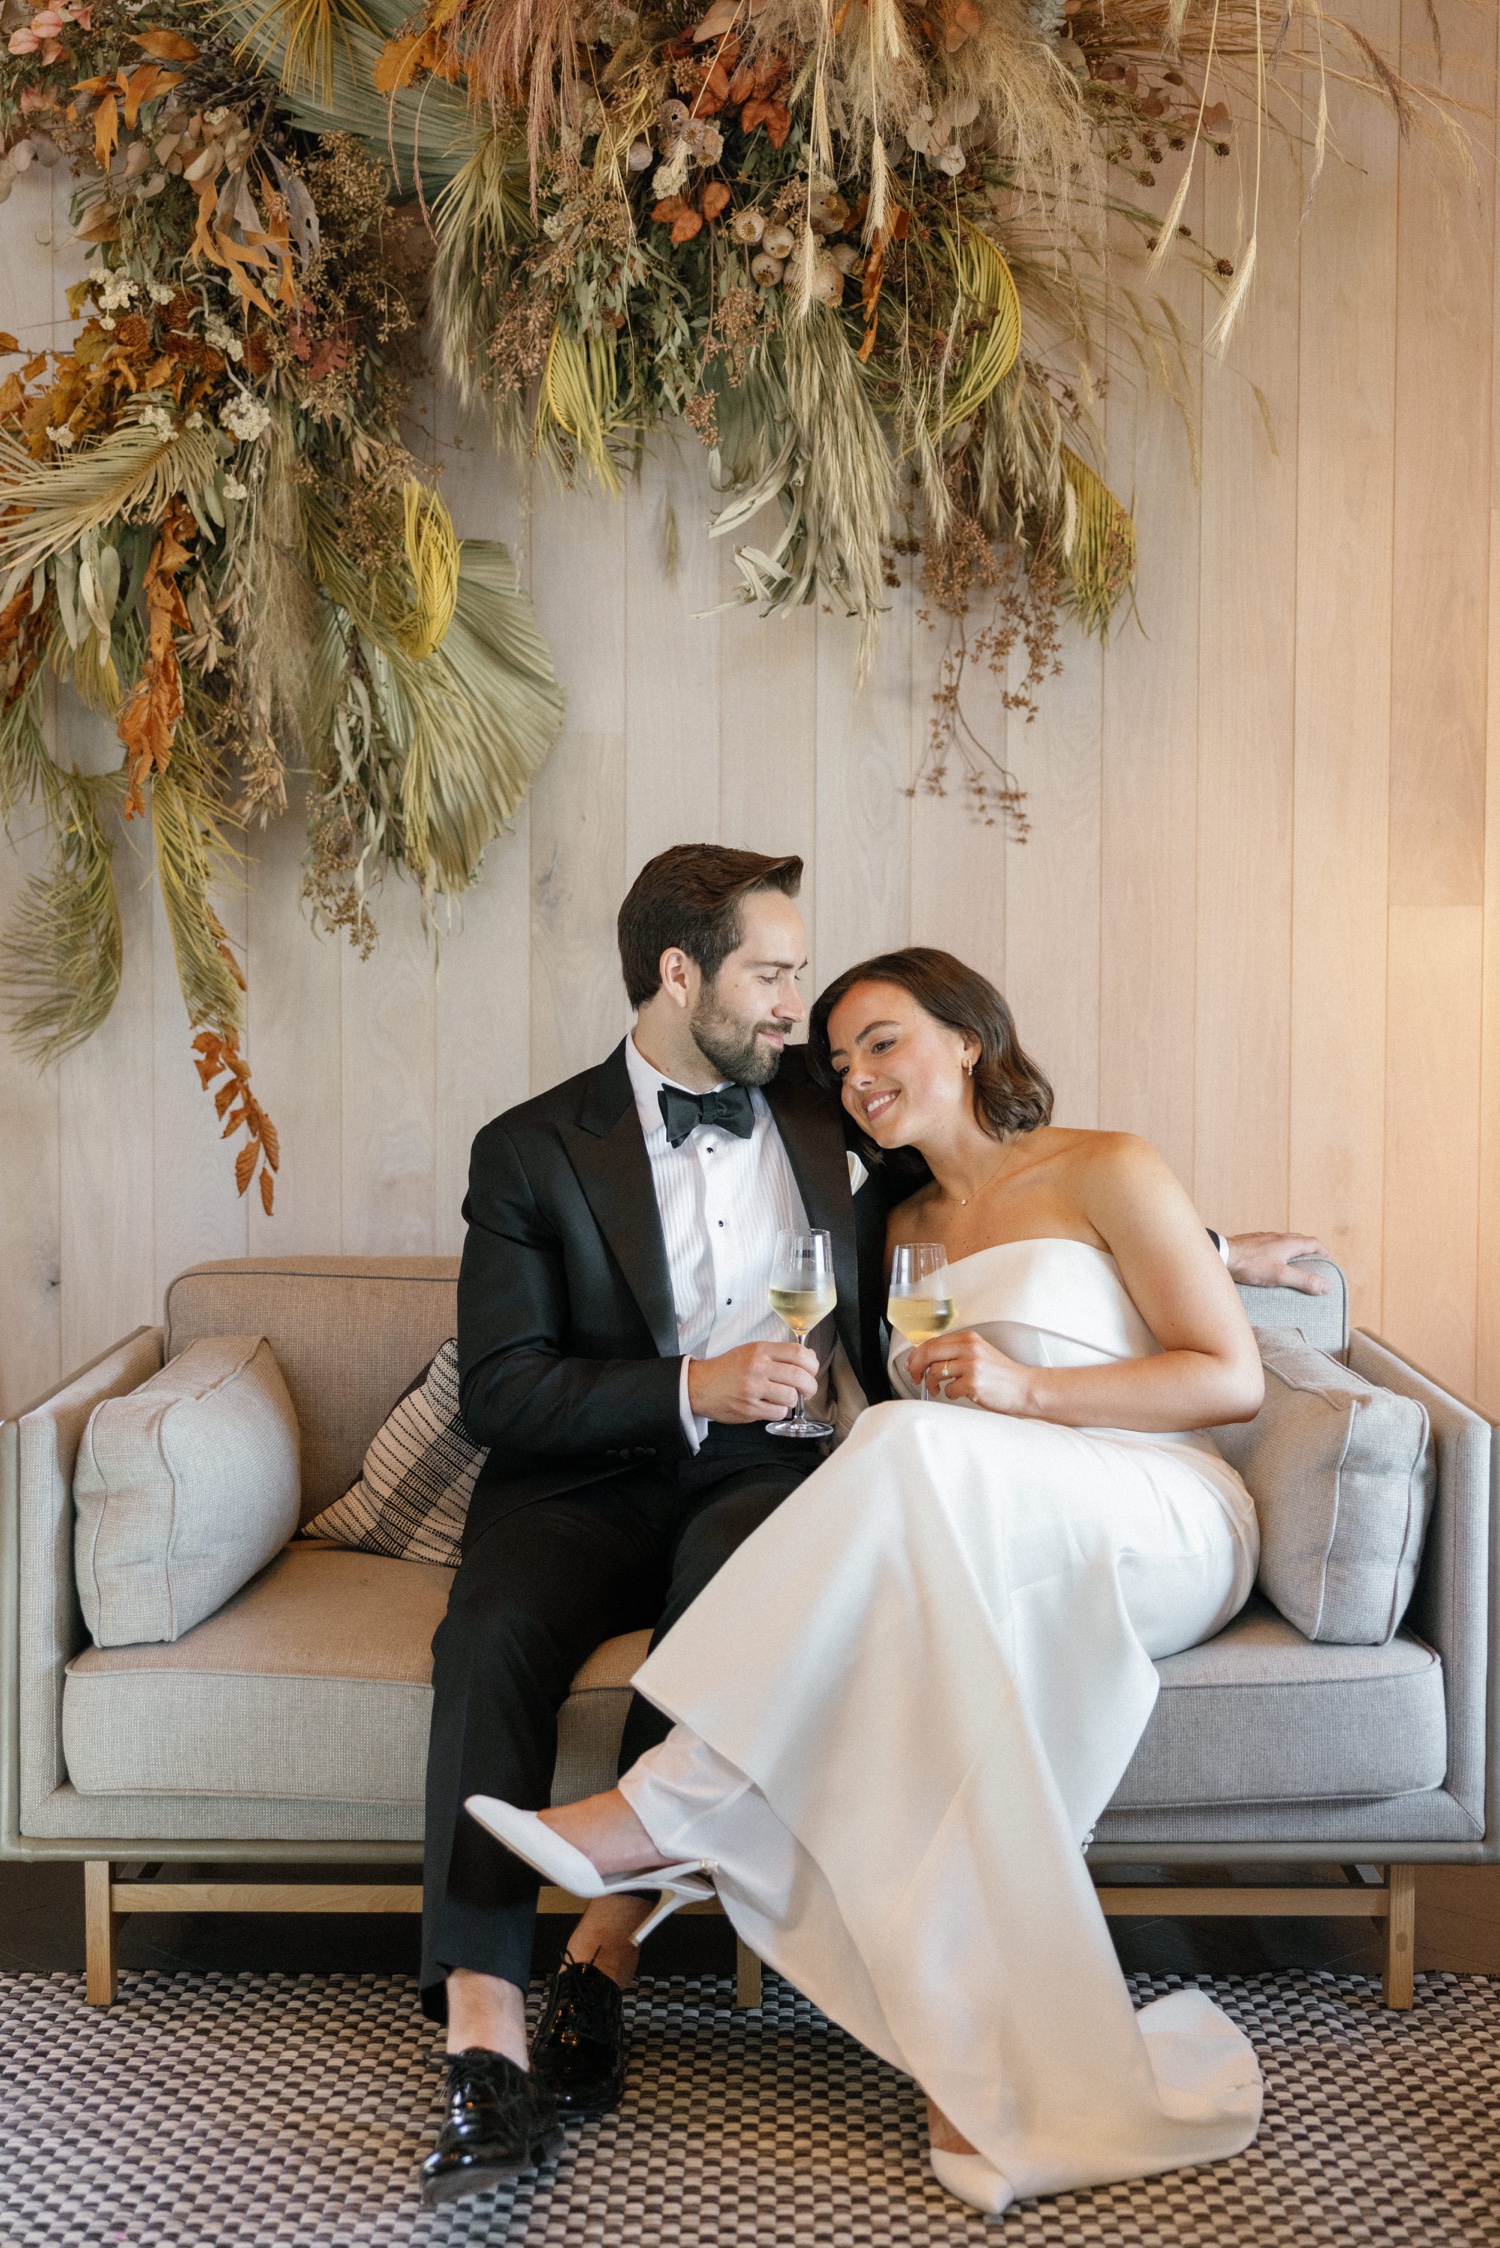 https://fetch.getnarrativeapp.com/static/1f660019-b49f-4837-a24a-1cae9e0f314c/smiling-bride-in-white-dress-sitting-on-loveseat-with-groom-in-black-tuxedo-on-stanly-ranch-wedding-day.jpg?w=1500